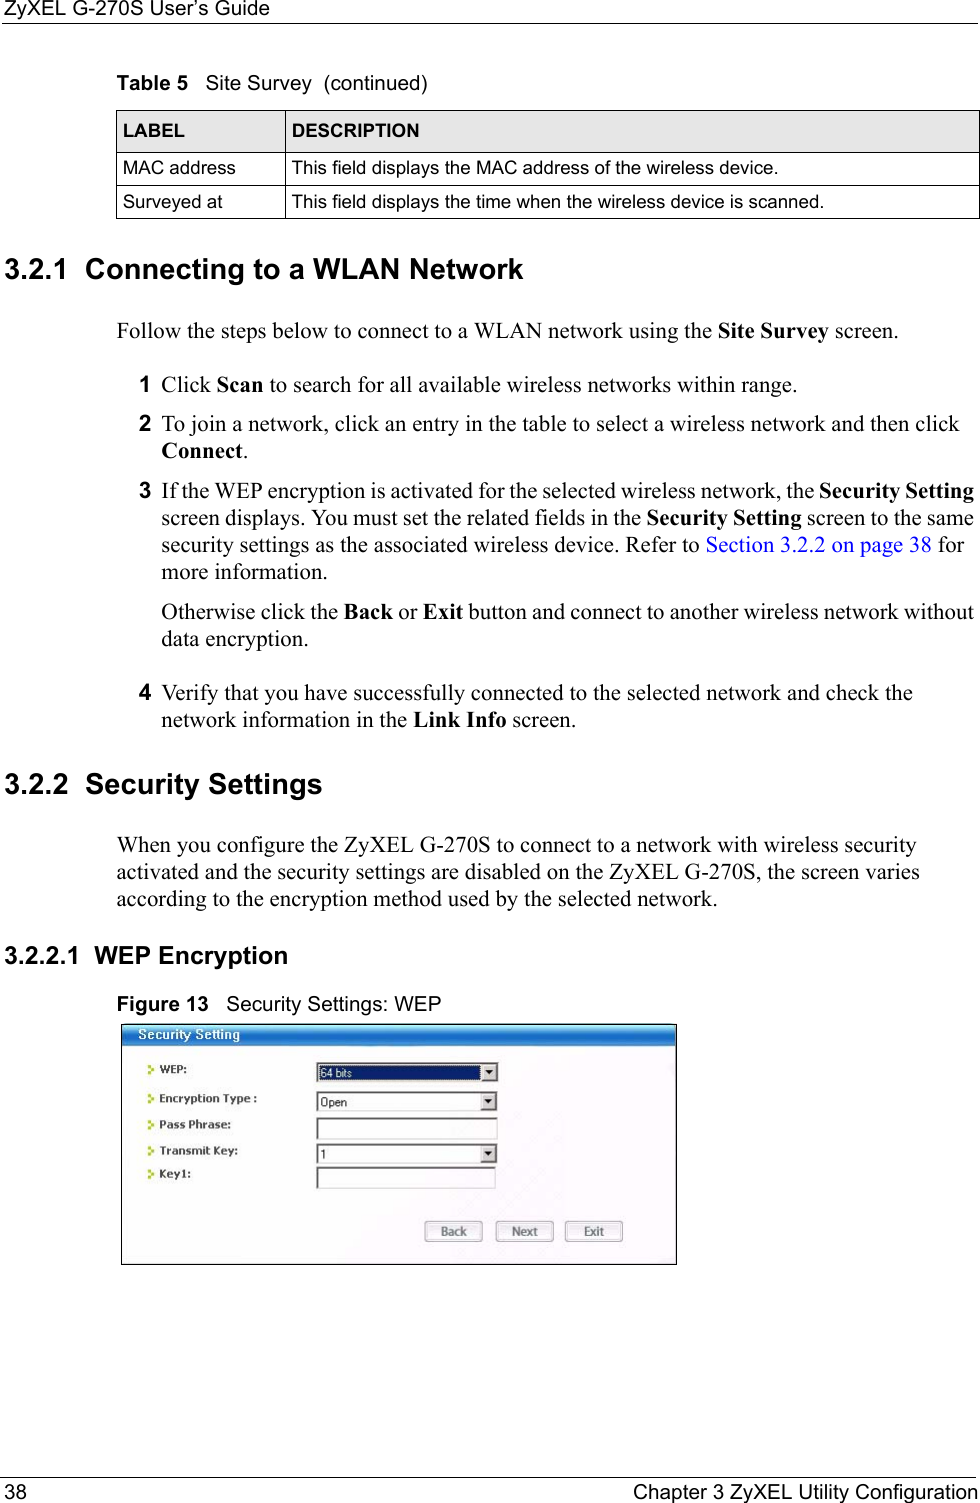 ZyXEL G-270S User’s Guide38 Chapter 3 ZyXEL Utility Configuration3.2.1  Connecting to a WLAN Network Follow the steps below to connect to a WLAN network using the Site Survey screen.1Click Scan to search for all available wireless networks within range.2To join a network, click an entry in the table to select a wireless network and then click Connect.3If the WEP encryption is activated for the selected wireless network, the Security Setting screen displays. You must set the related fields in the Security Setting screen to the same security settings as the associated wireless device. Refer to Section 3.2.2 on page 38 for more information.Otherwise click the Back or Exit button and connect to another wireless network without data encryption.4Verify that you have successfully connected to the selected network and check the network information in the Link Info screen.3.2.2  Security Settings When you configure the ZyXEL G-270S to connect to a network with wireless security activated and the security settings are disabled on the ZyXEL G-270S, the screen varies according to the encryption method used by the selected network.3.2.2.1  WEP EncryptionFigure 13   Security Settings: WEP  MAC address  This field displays the MAC address of the wireless device.Surveyed at  This field displays the time when the wireless device is scanned.Table 5   Site Survey  (continued)LABEL DESCRIPTION